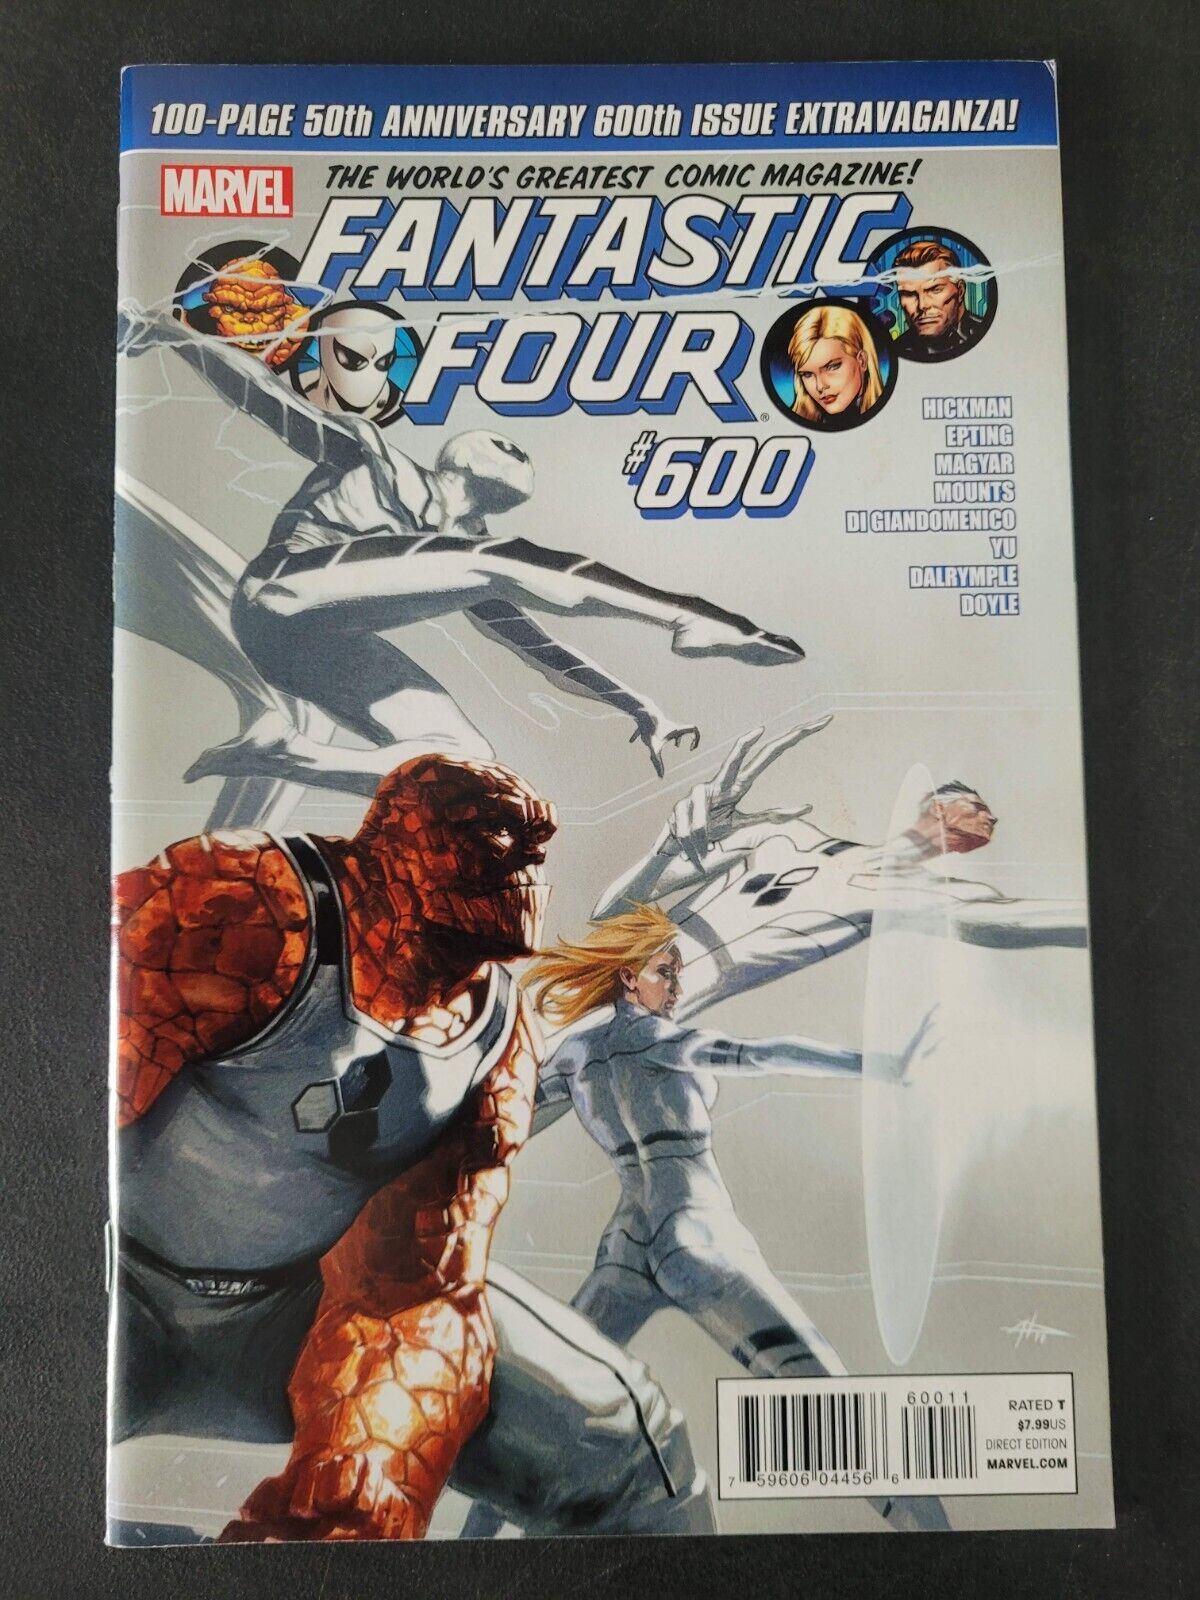 FANTASTIC FOUR #600 (20121) MARVEL COMICS DOUBLE-SIZED 100-PAGE ANNIVERSARY ISH